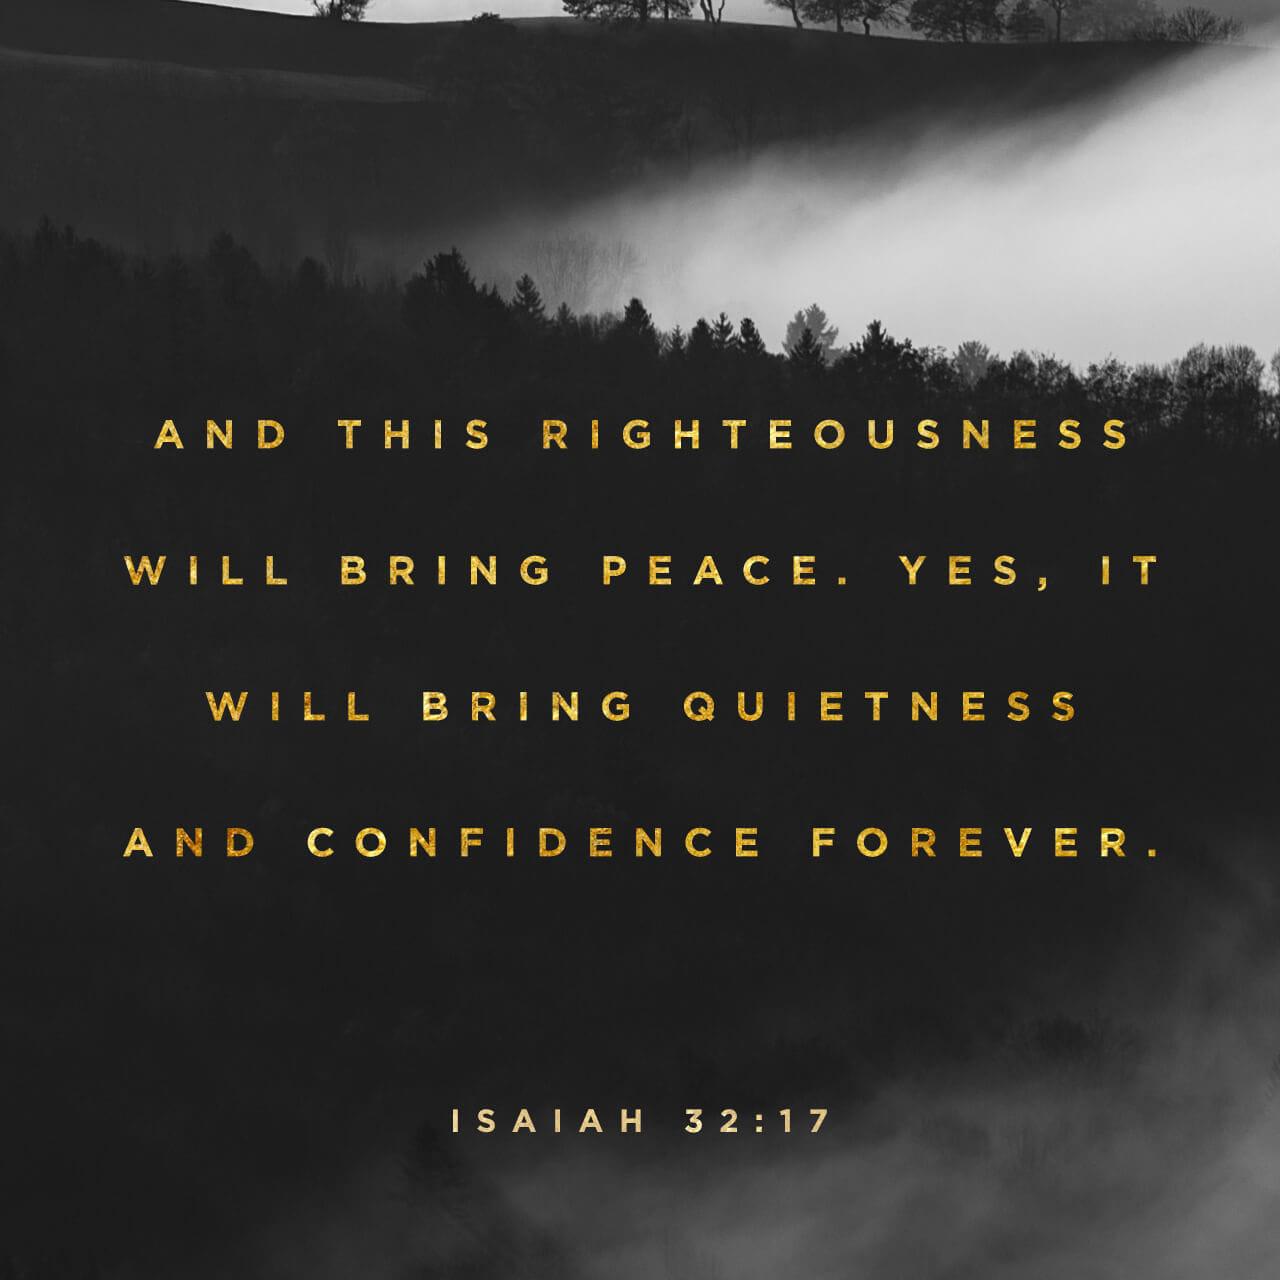 Bible Verse of the Day - day 154 - image 577 (Isaiah 32:1-20)